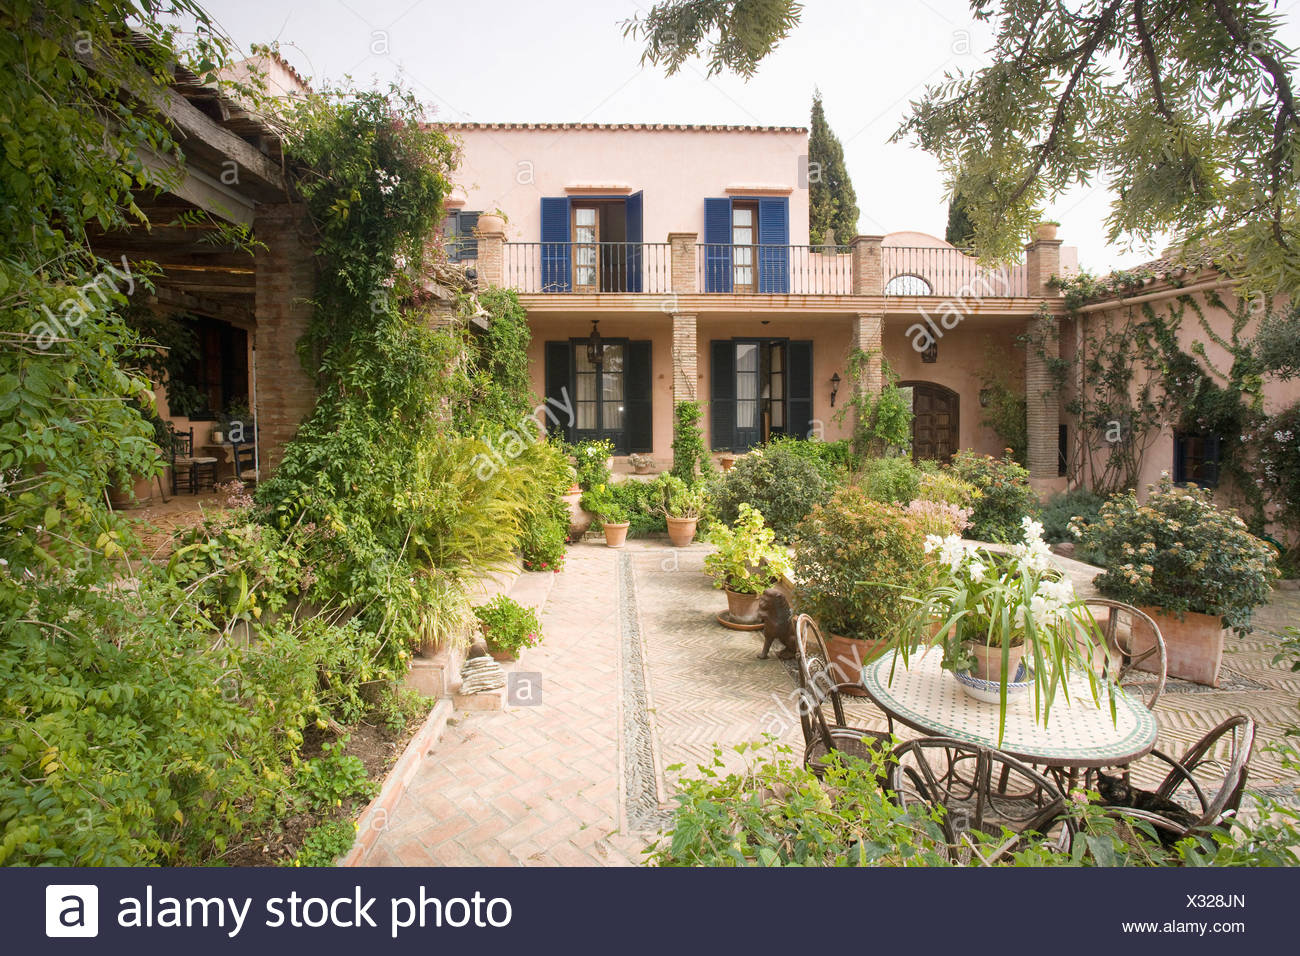 Table And Chairs On Patio In Spanish Courtyard Garden With